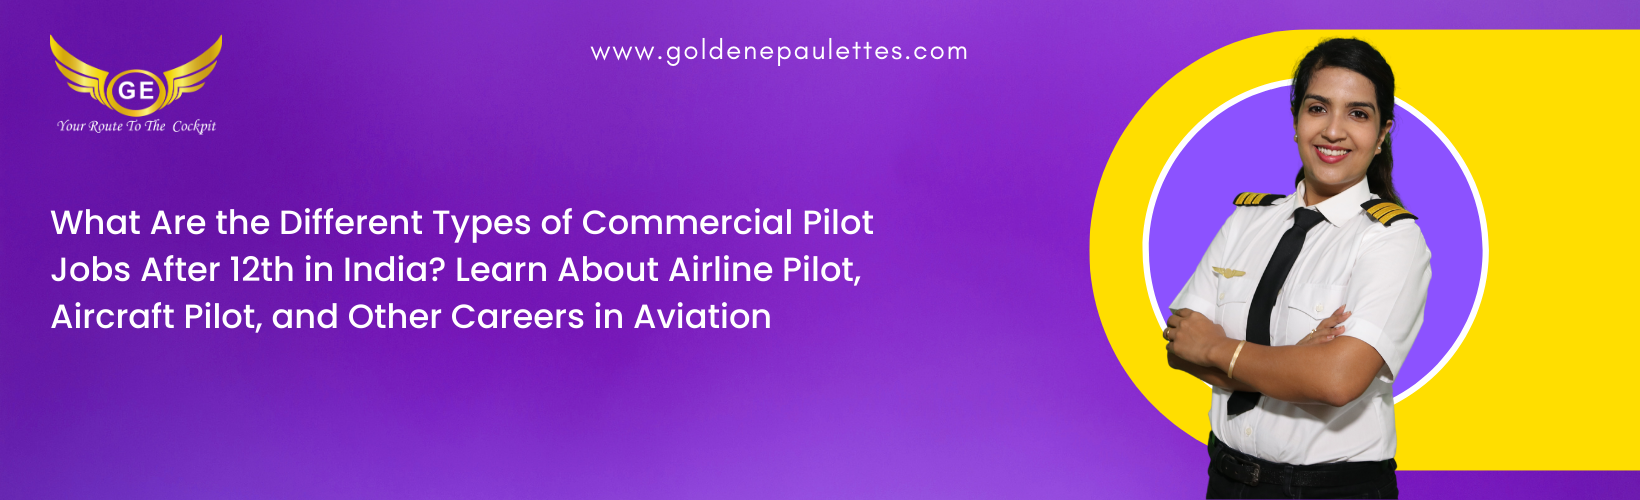 What Are the Different Types of Commercial Pilot Jobs After 12th in India